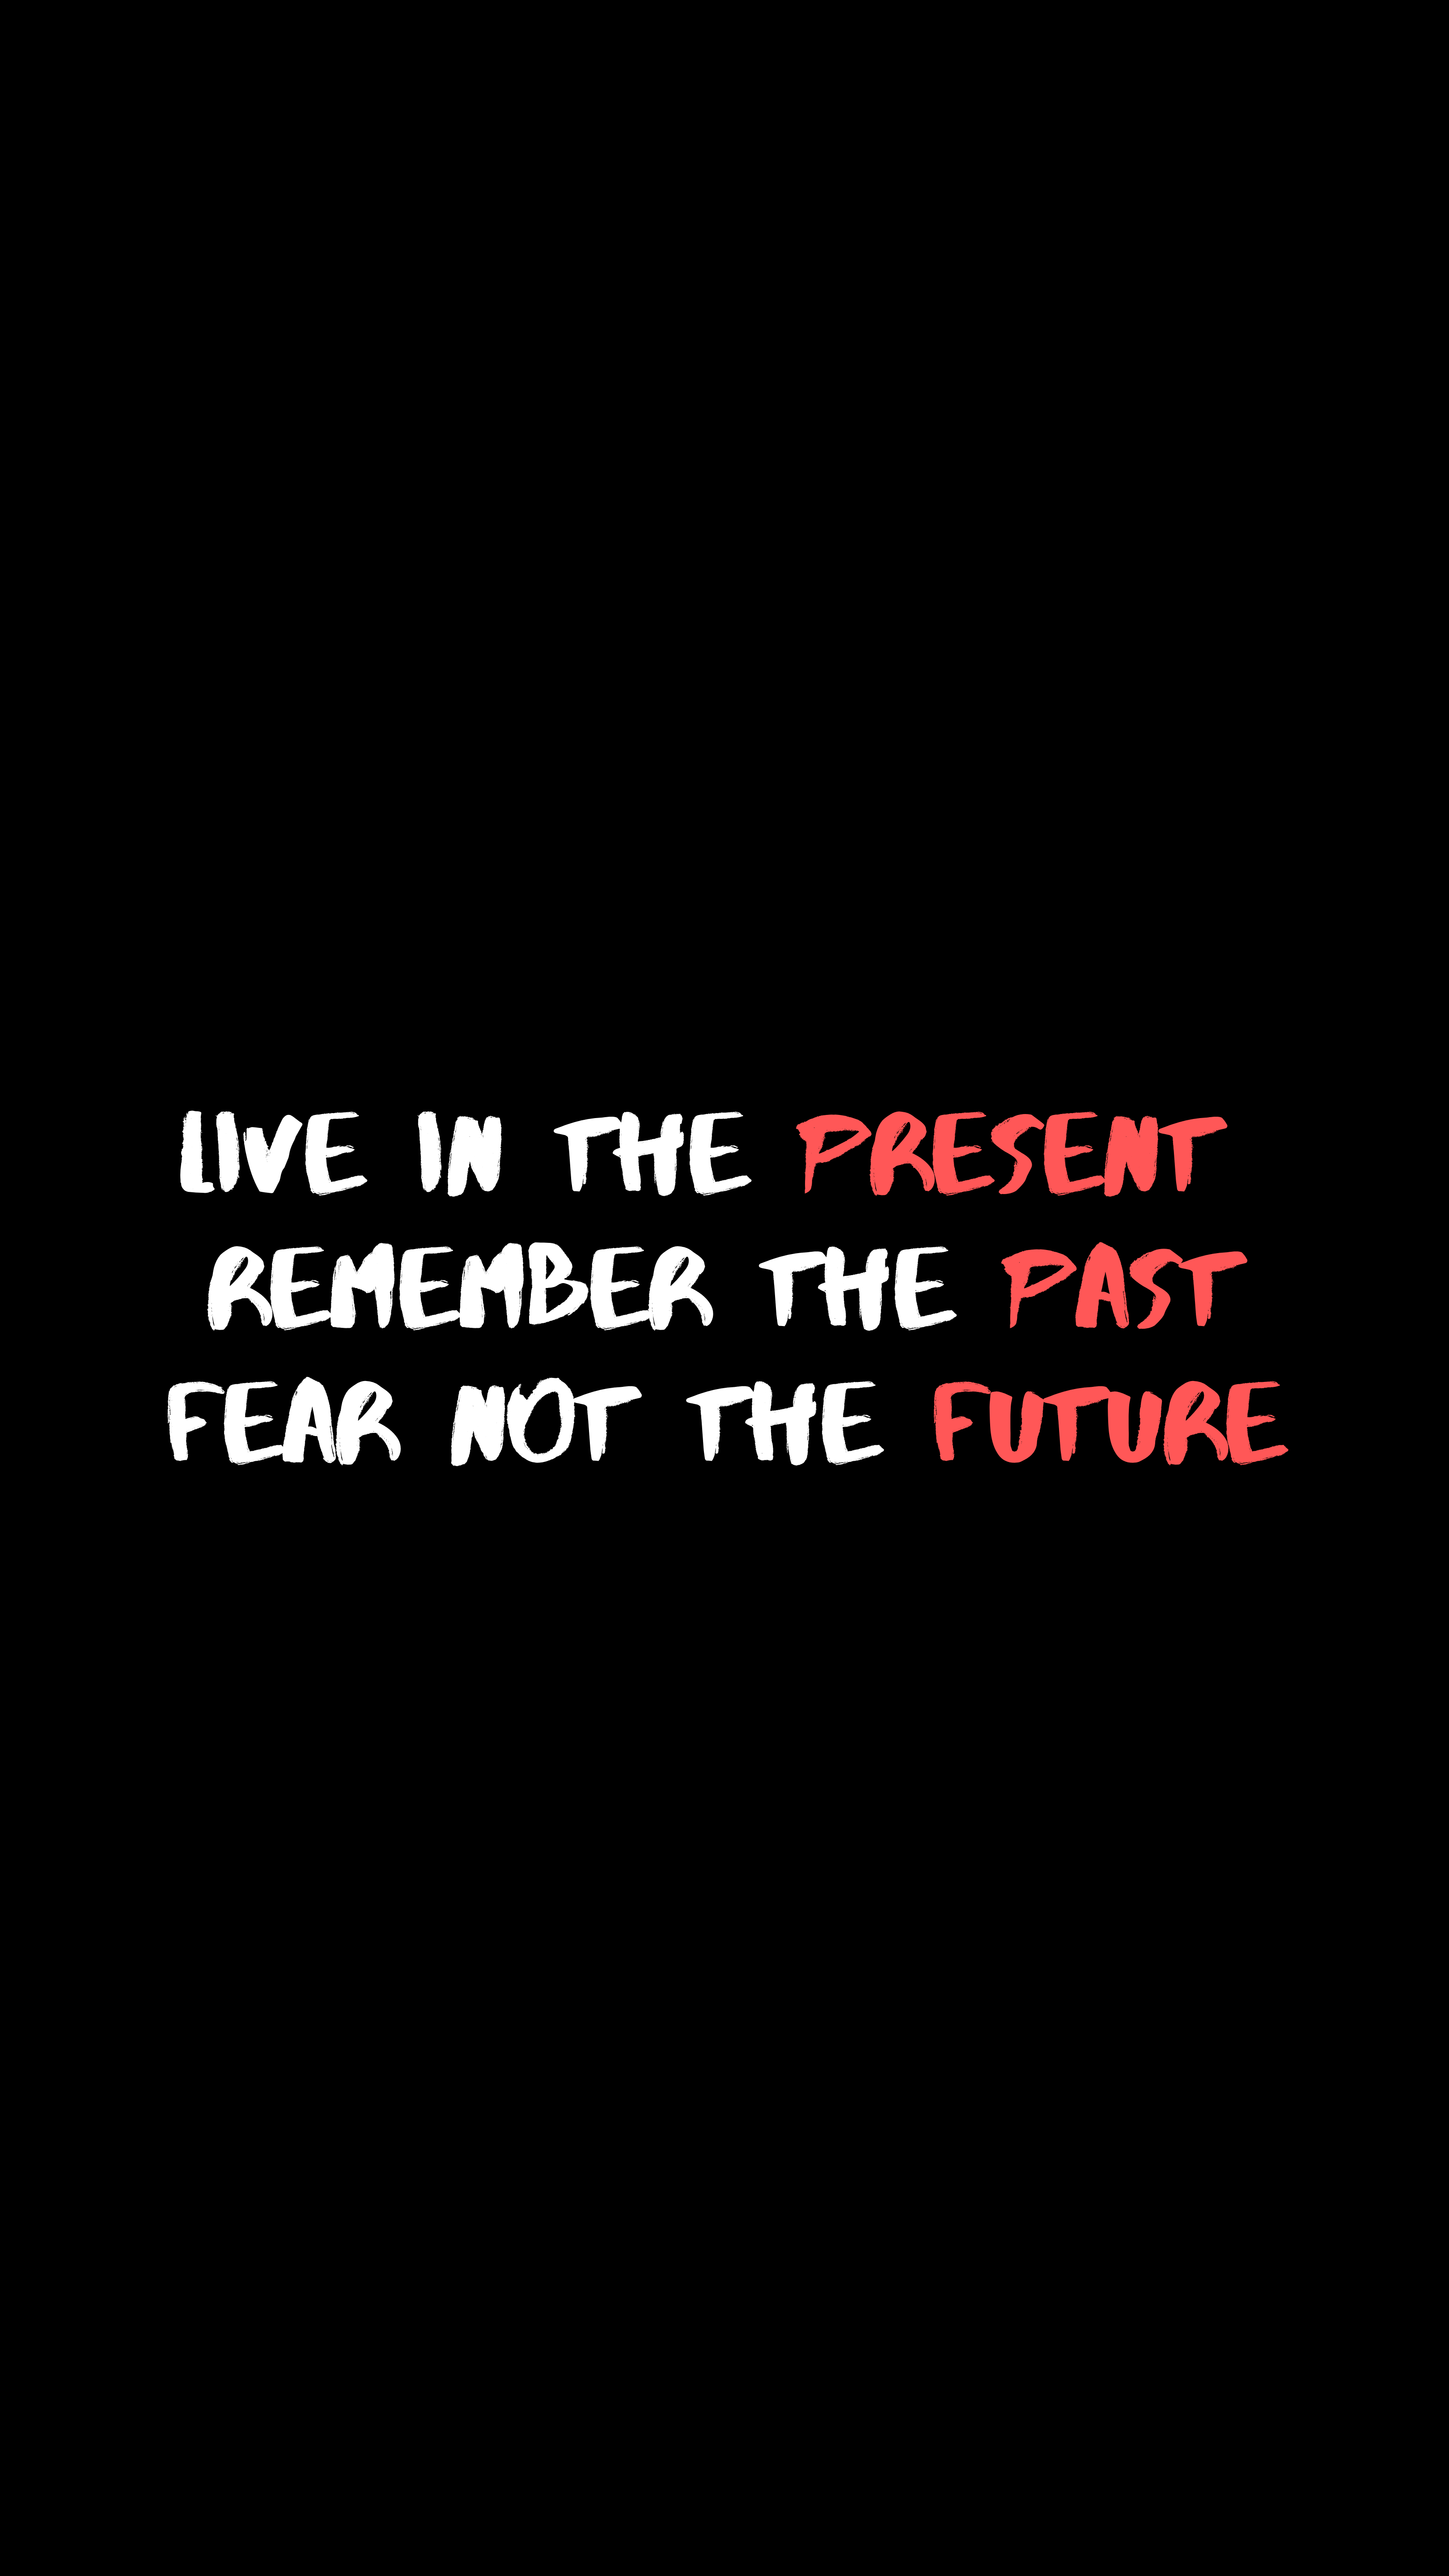 motivation, words, future, quotation, inspiration, quote, present, past Full HD